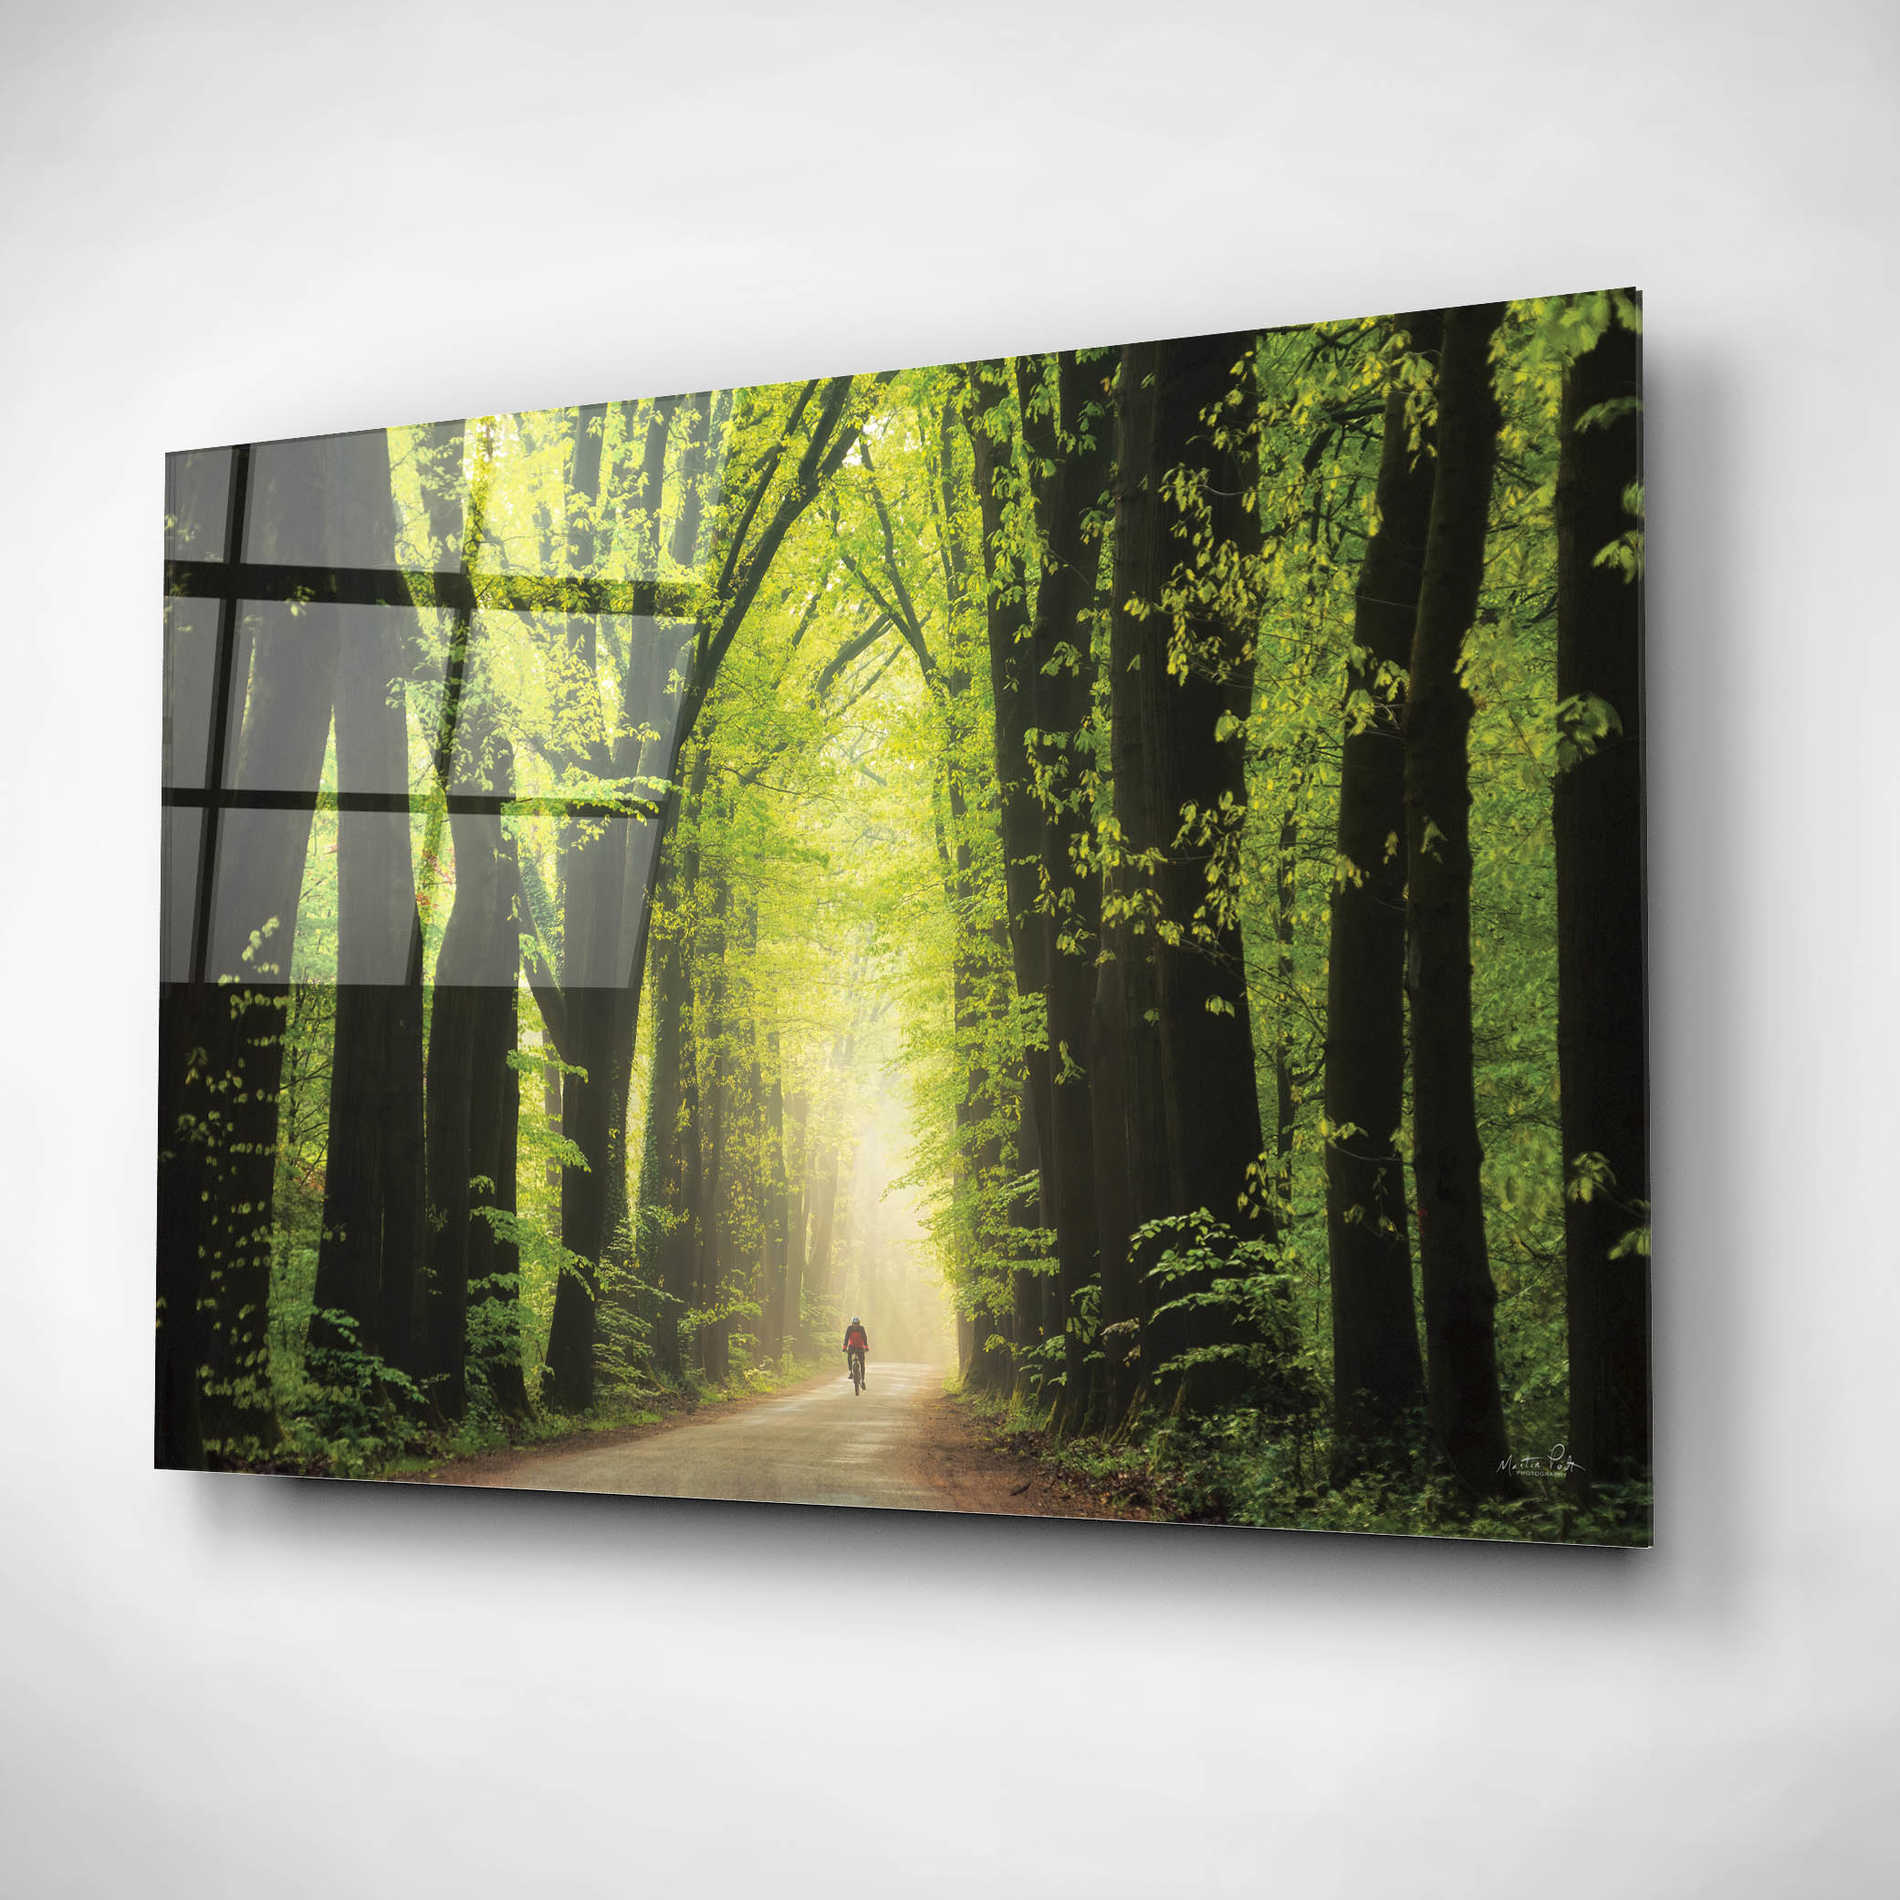 Epic Art 'Among Giants in Springtime' by Martin Podt, Acrylic Glass Wall Art,16x12